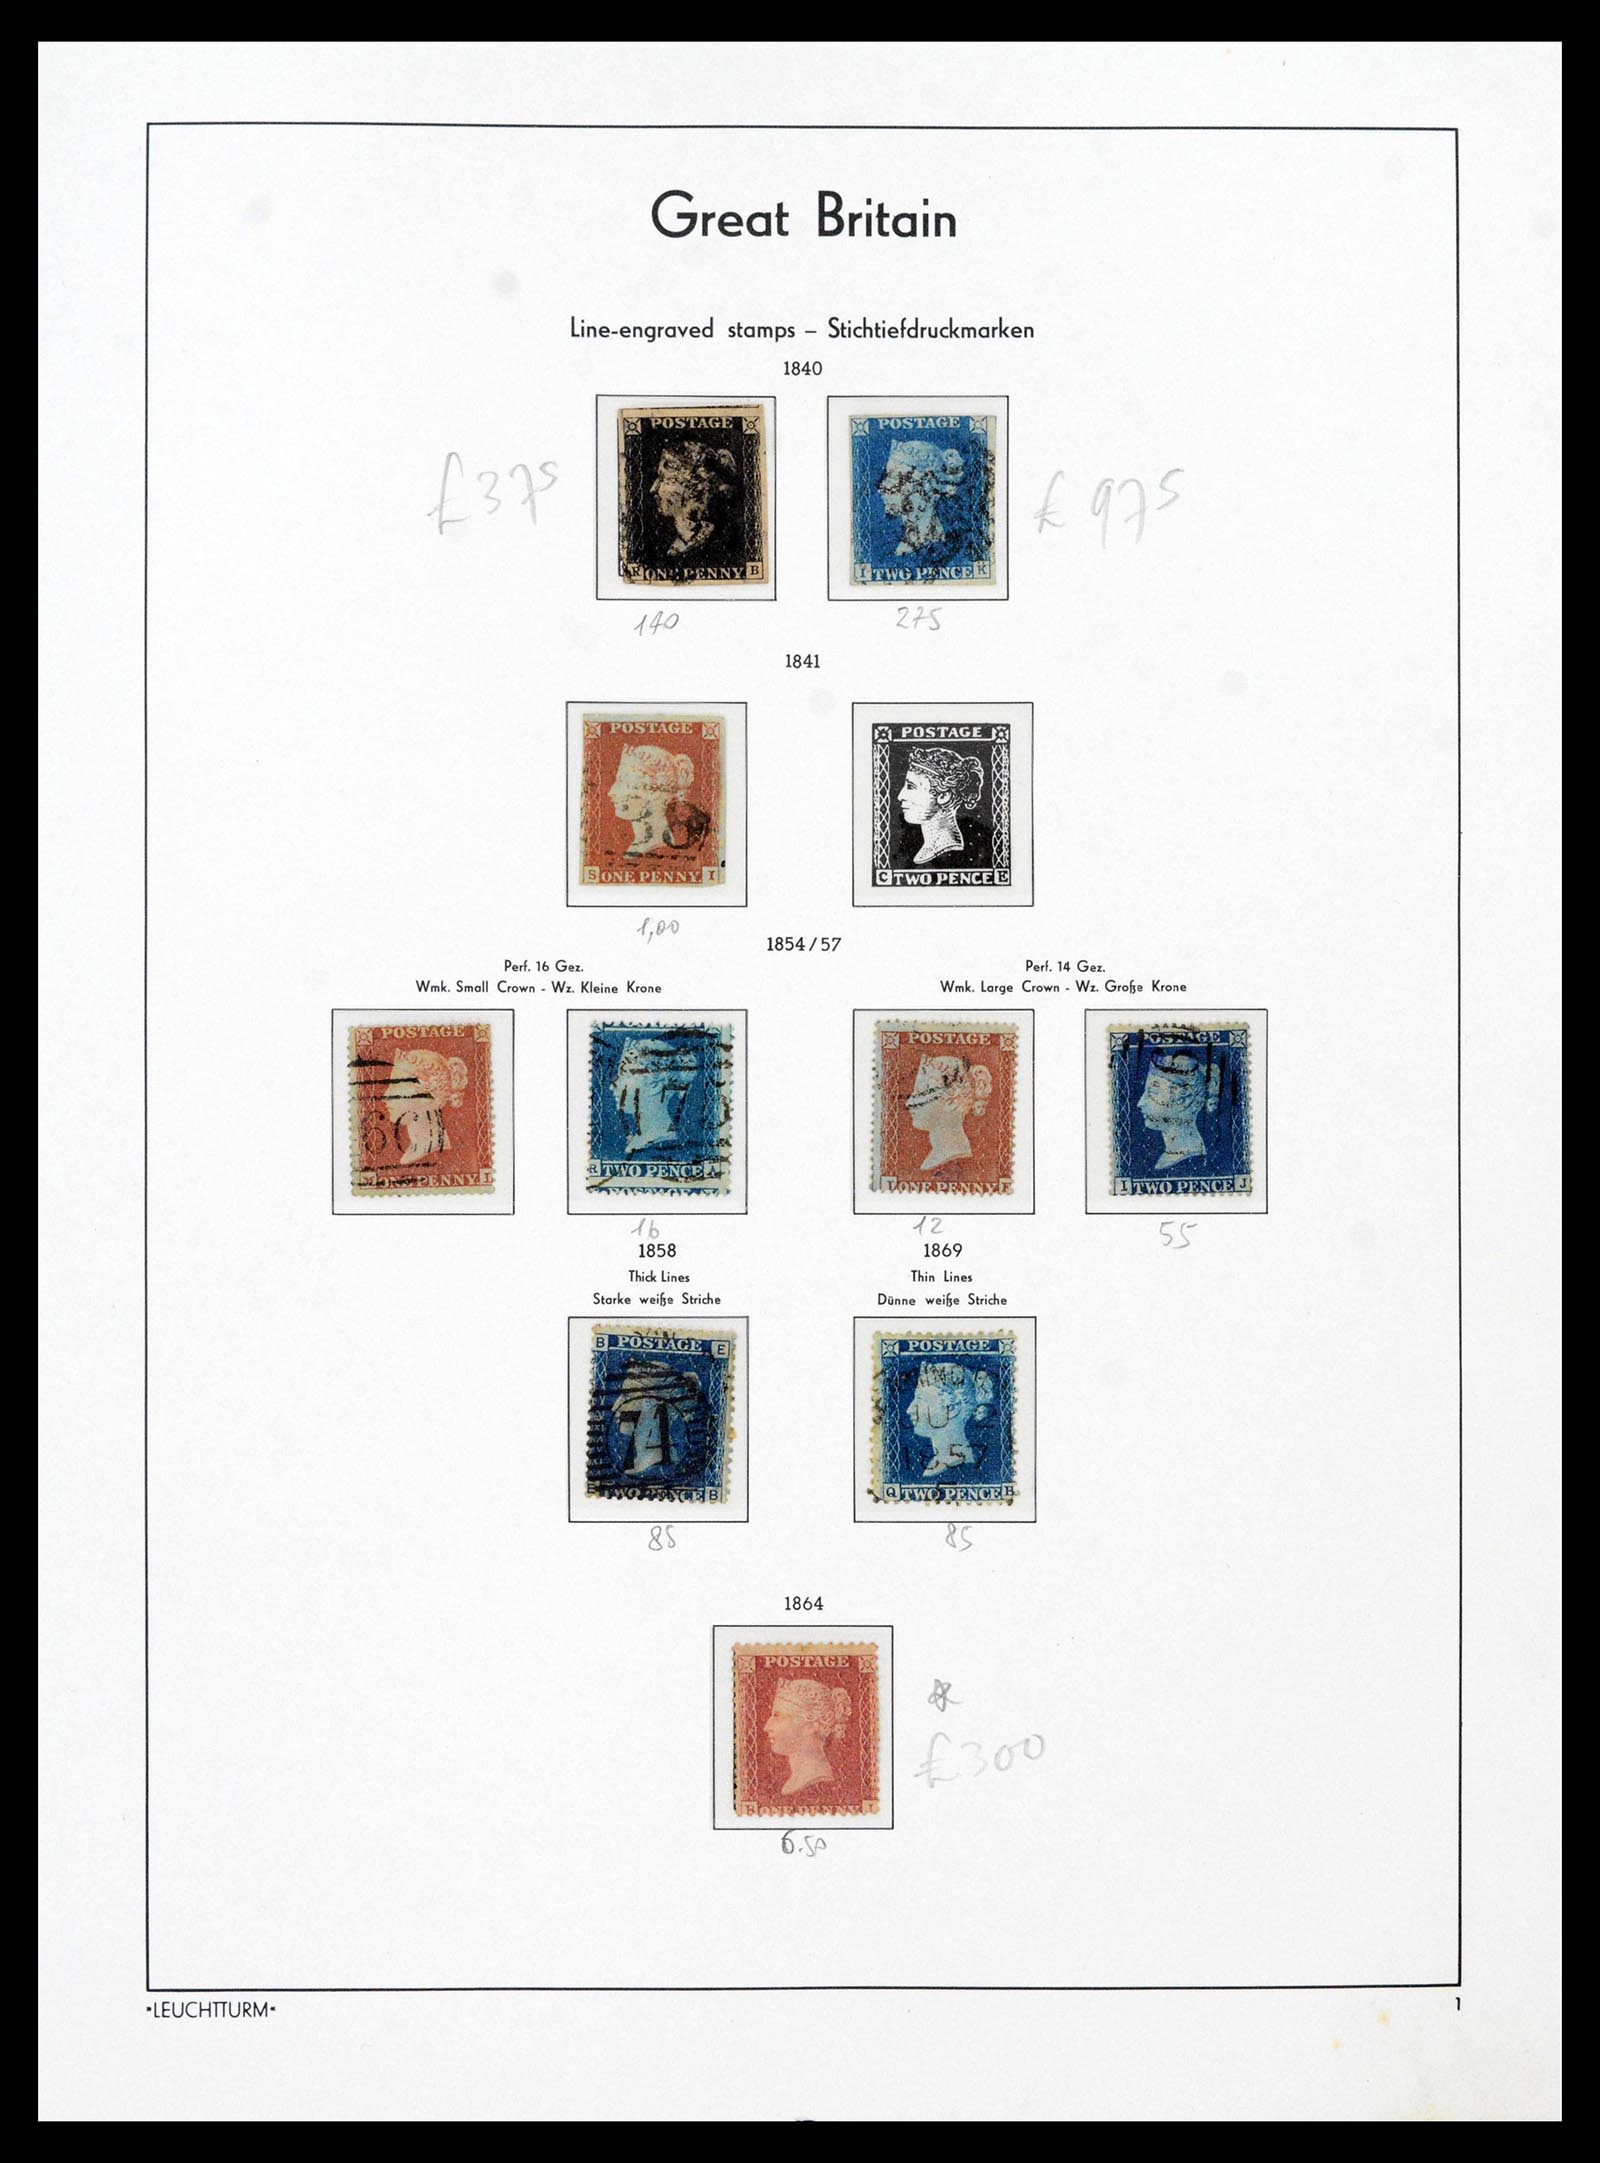 39150 0001 - Stamp collection 39150 Great Britain 1840-1984.